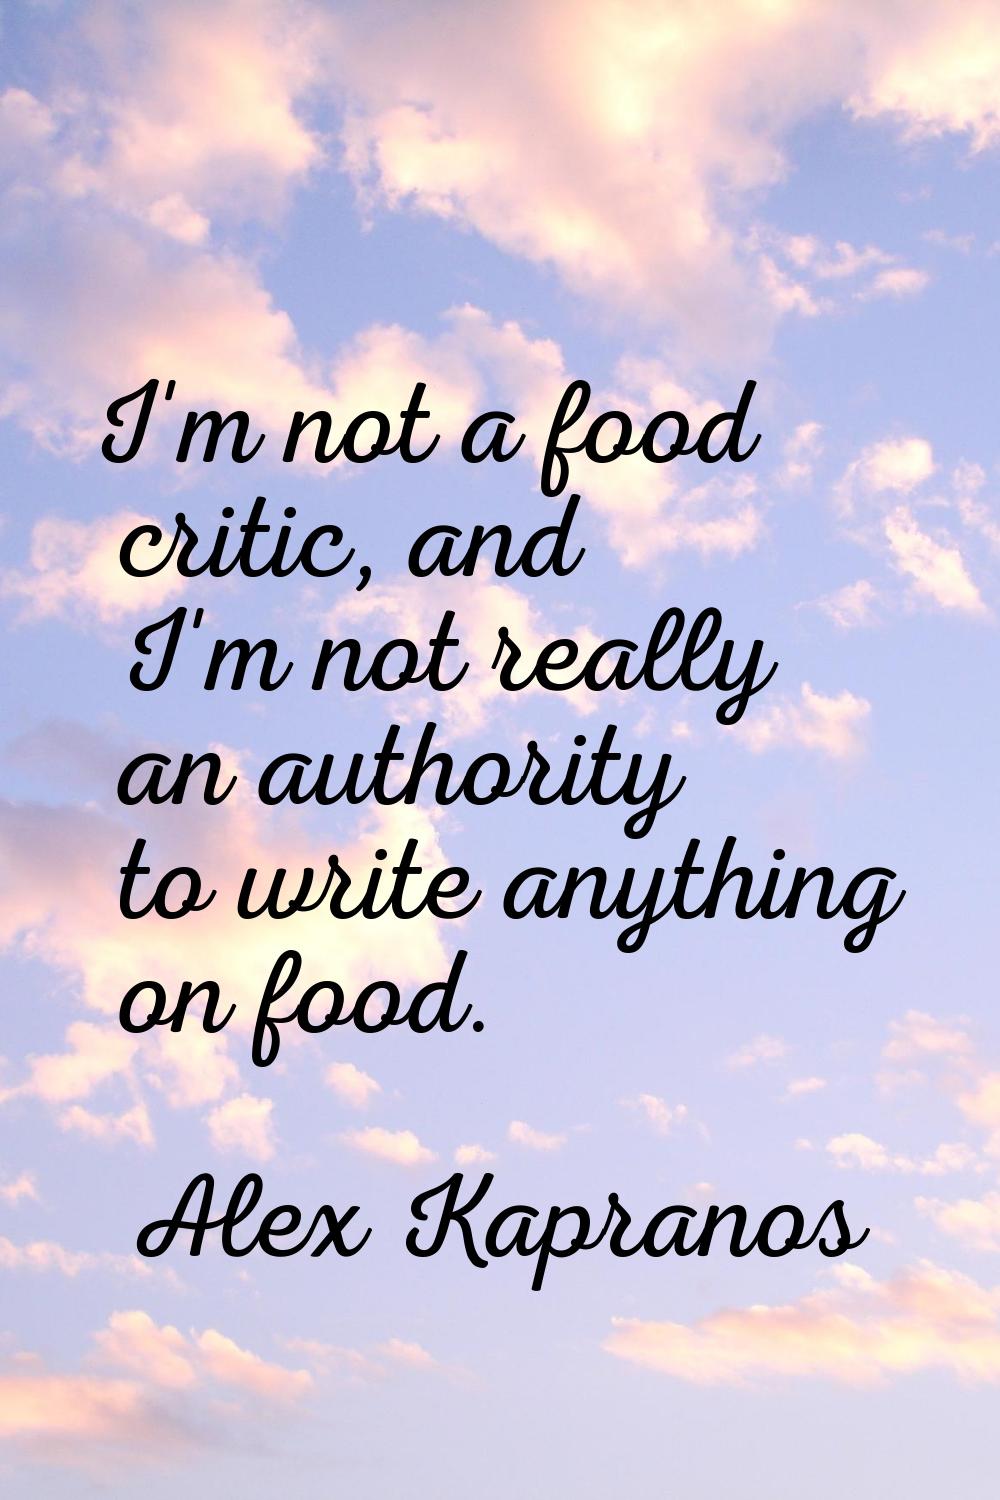 I'm not a food critic, and I'm not really an authority to write anything on food.